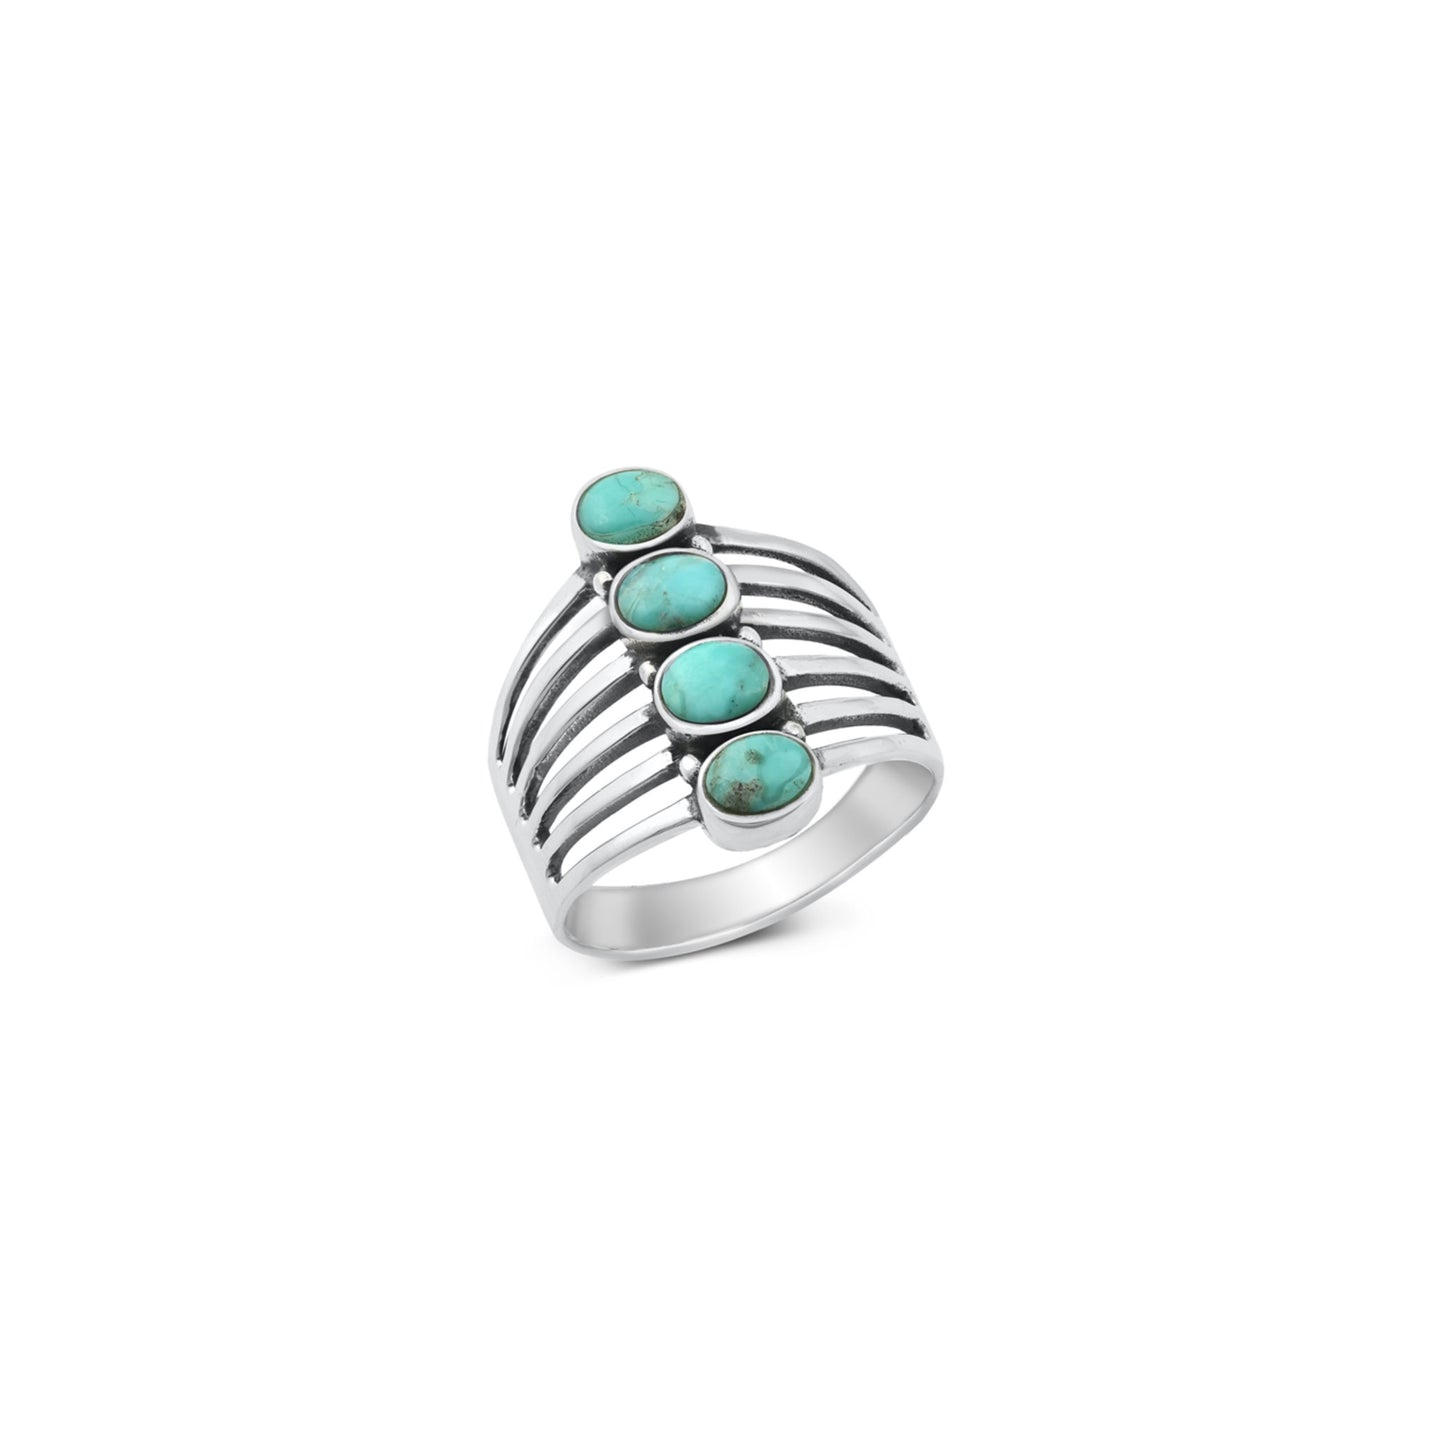 Bali Genuine Turquoise Sterling Silver Ring